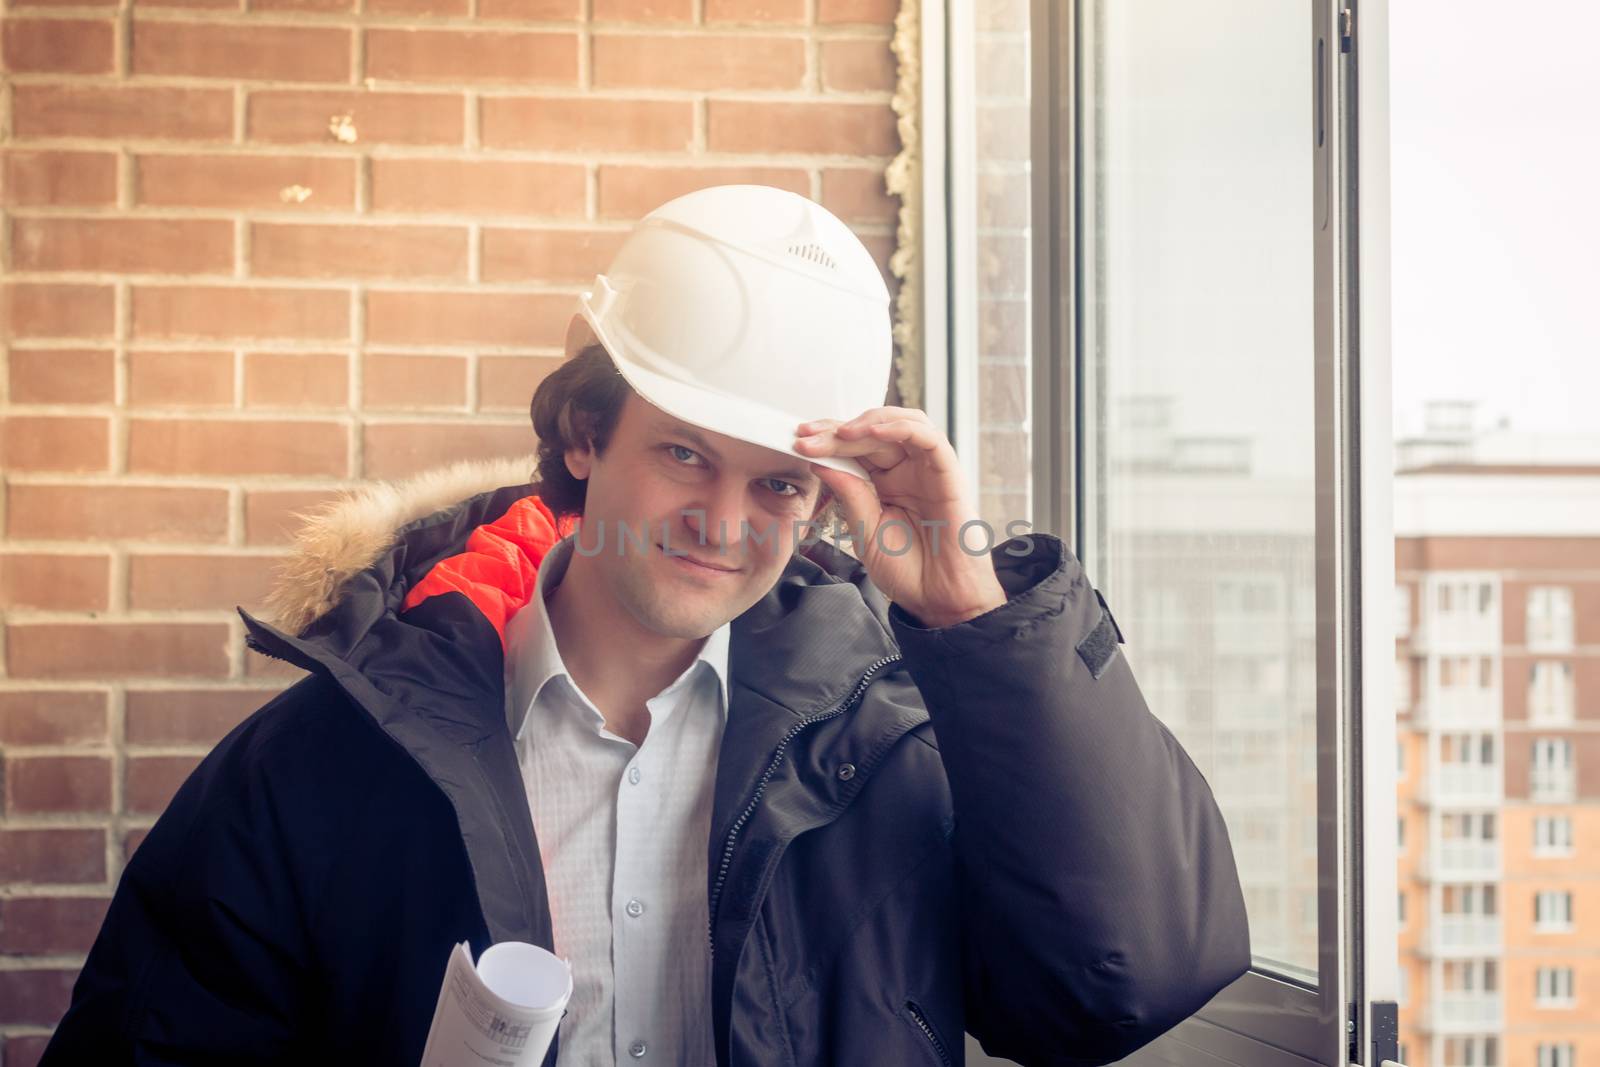 Smiling business engineer with white safety helmet holding blueprint project plan on brick building background, happy businessman greeting gesture and looking to the camera. Soft focus, toned. by MSharova